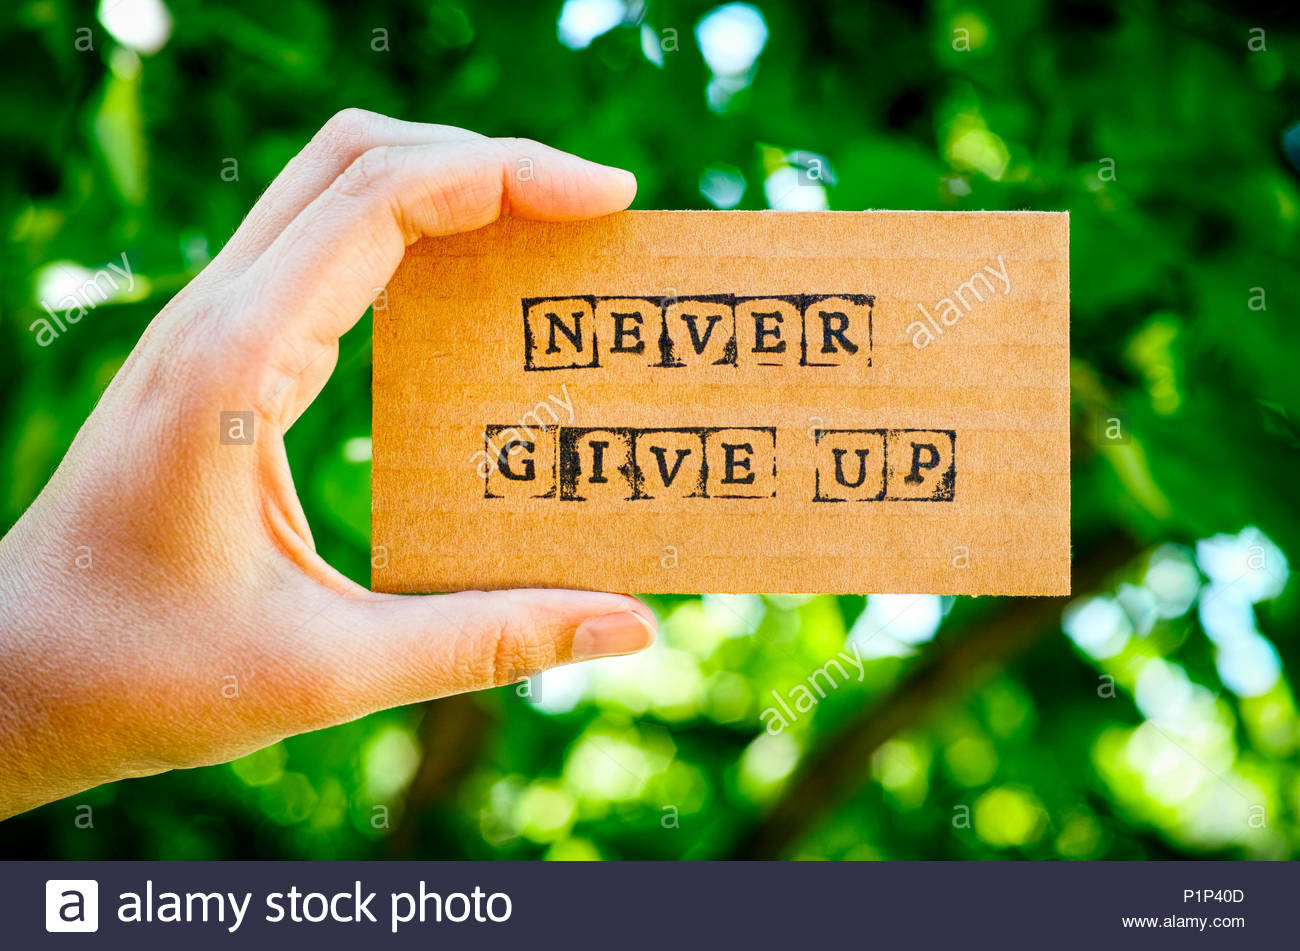 Never Give Up High Resolution Stock Photography and Images